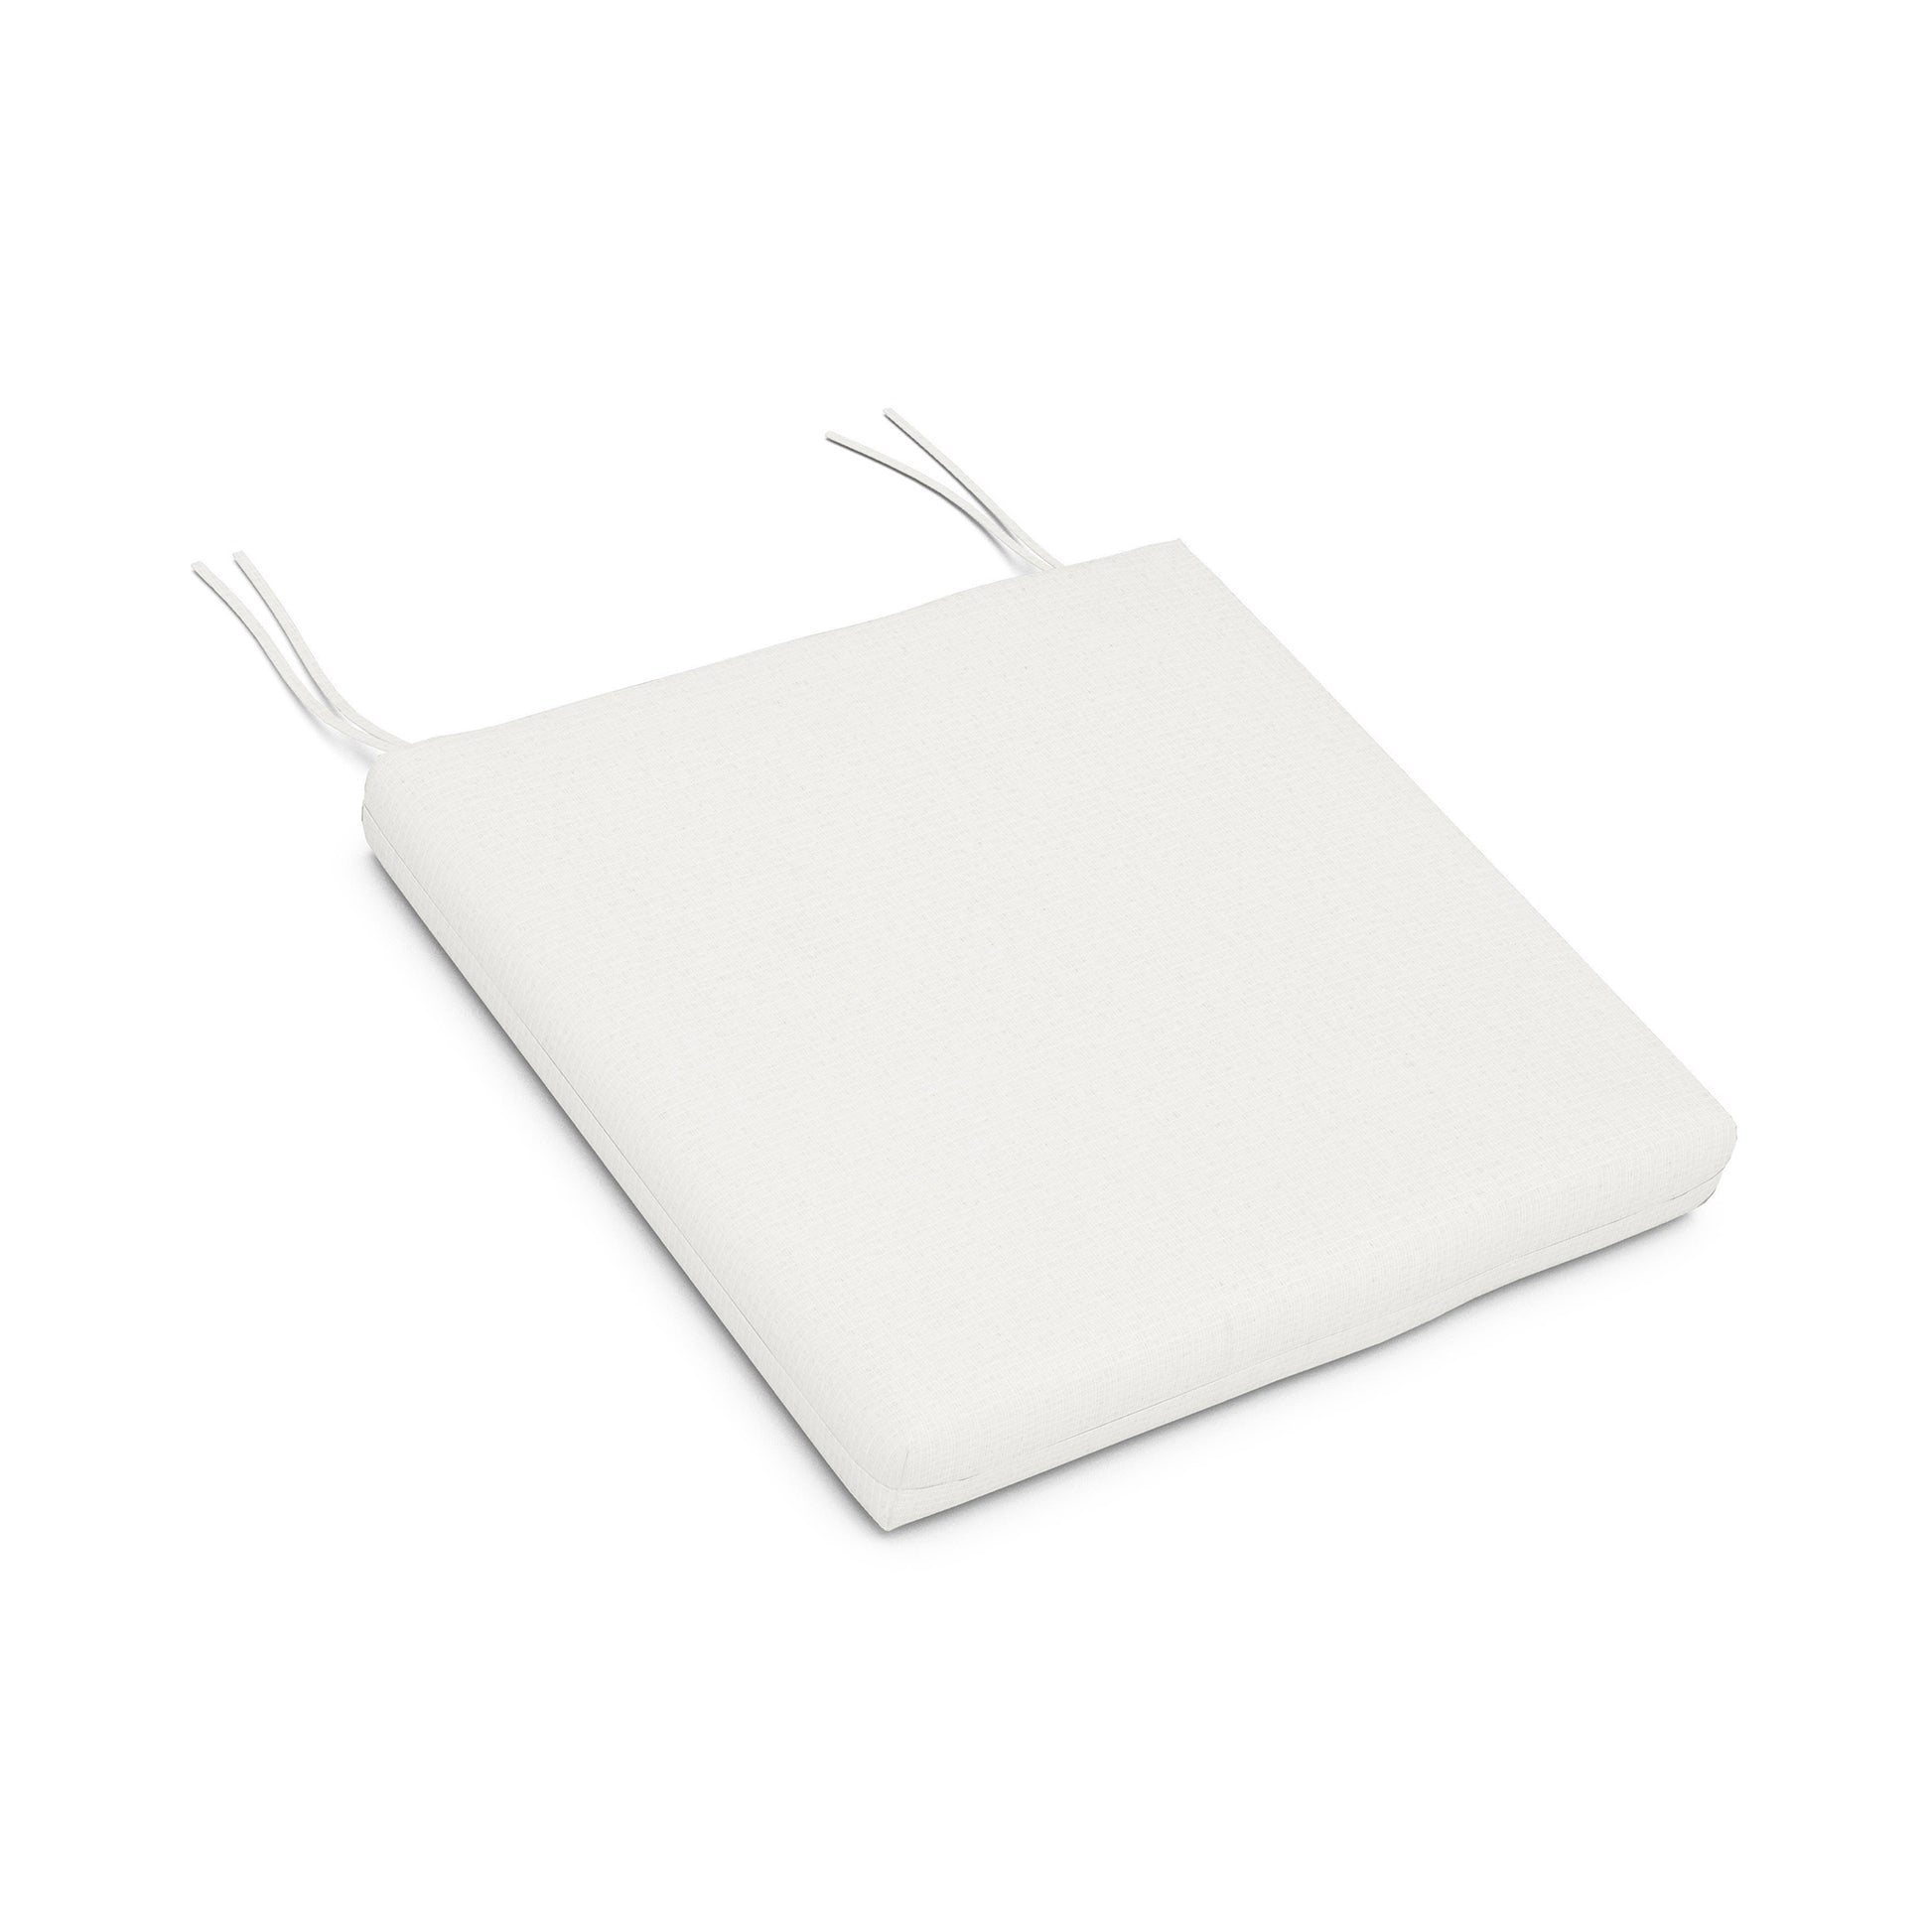 A POLYWOOD weather-resistant fabric-covered XPWS0183 seat cushion with two protruding strings for attachment, displayed on a plain white background.